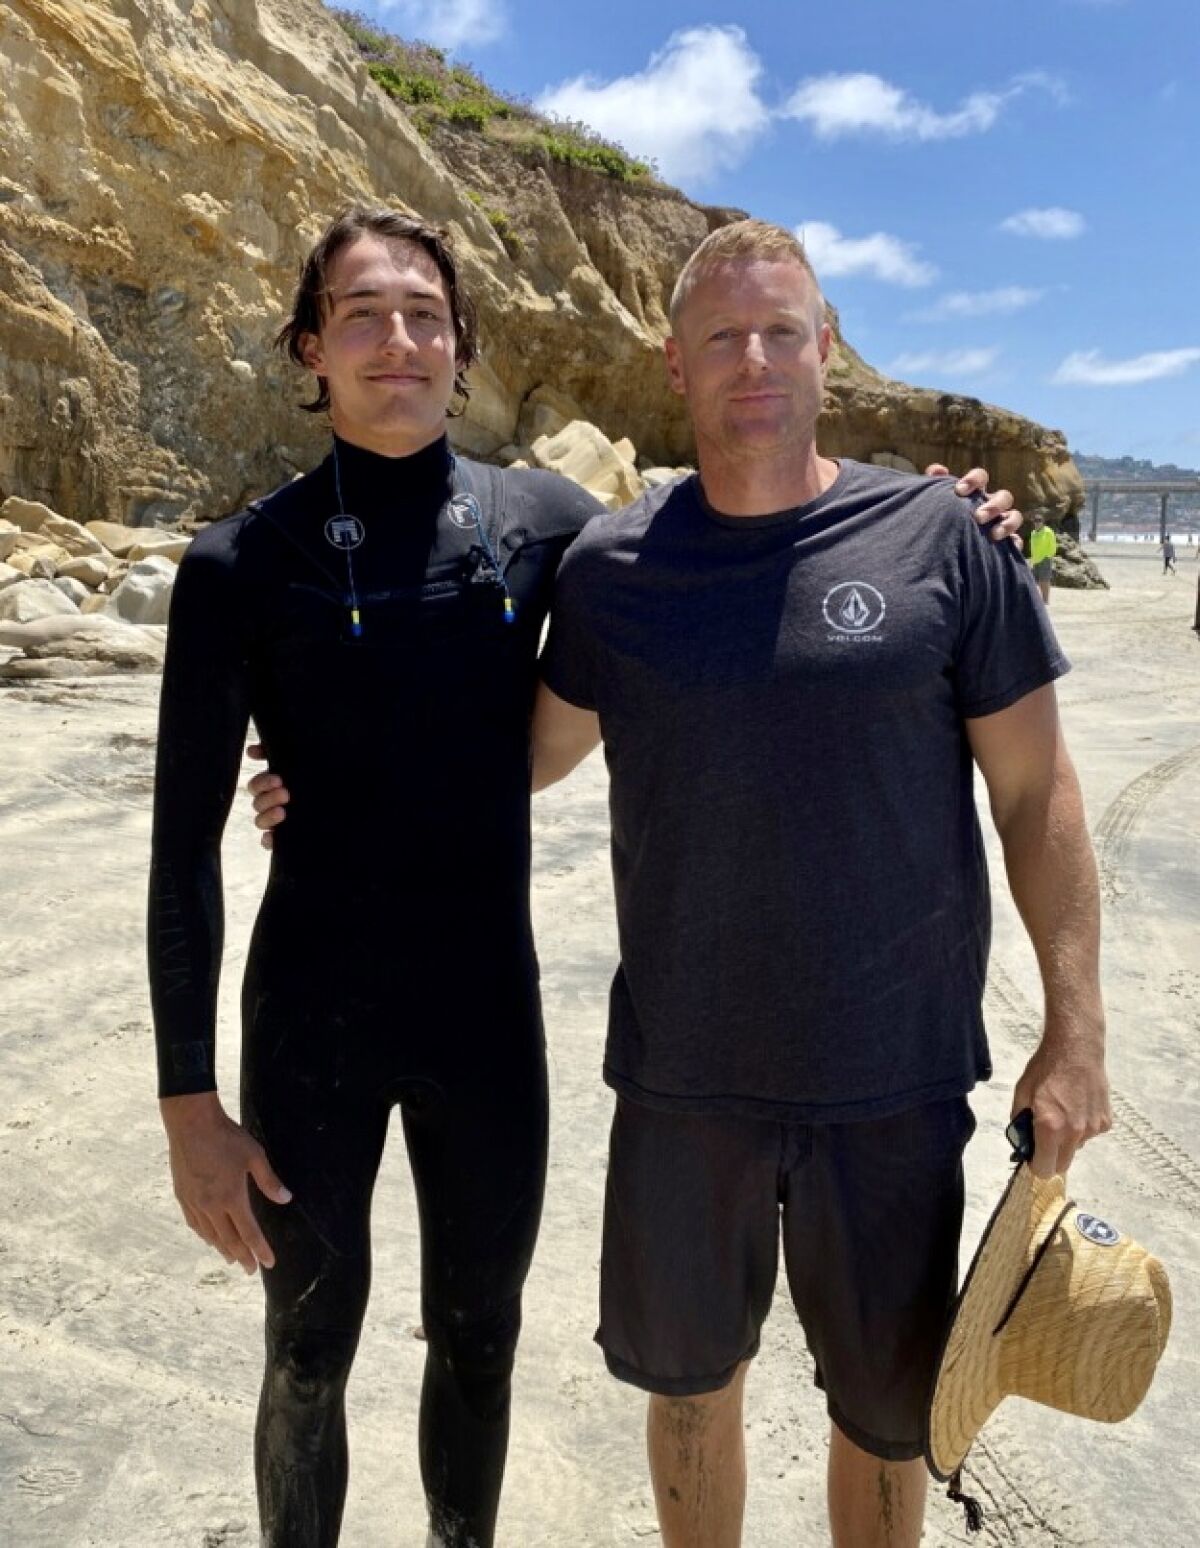 Jack Barone (left) and Neil Garrett worked together to save a 10-year-old girl from possible drowning at La Jolla Shores.